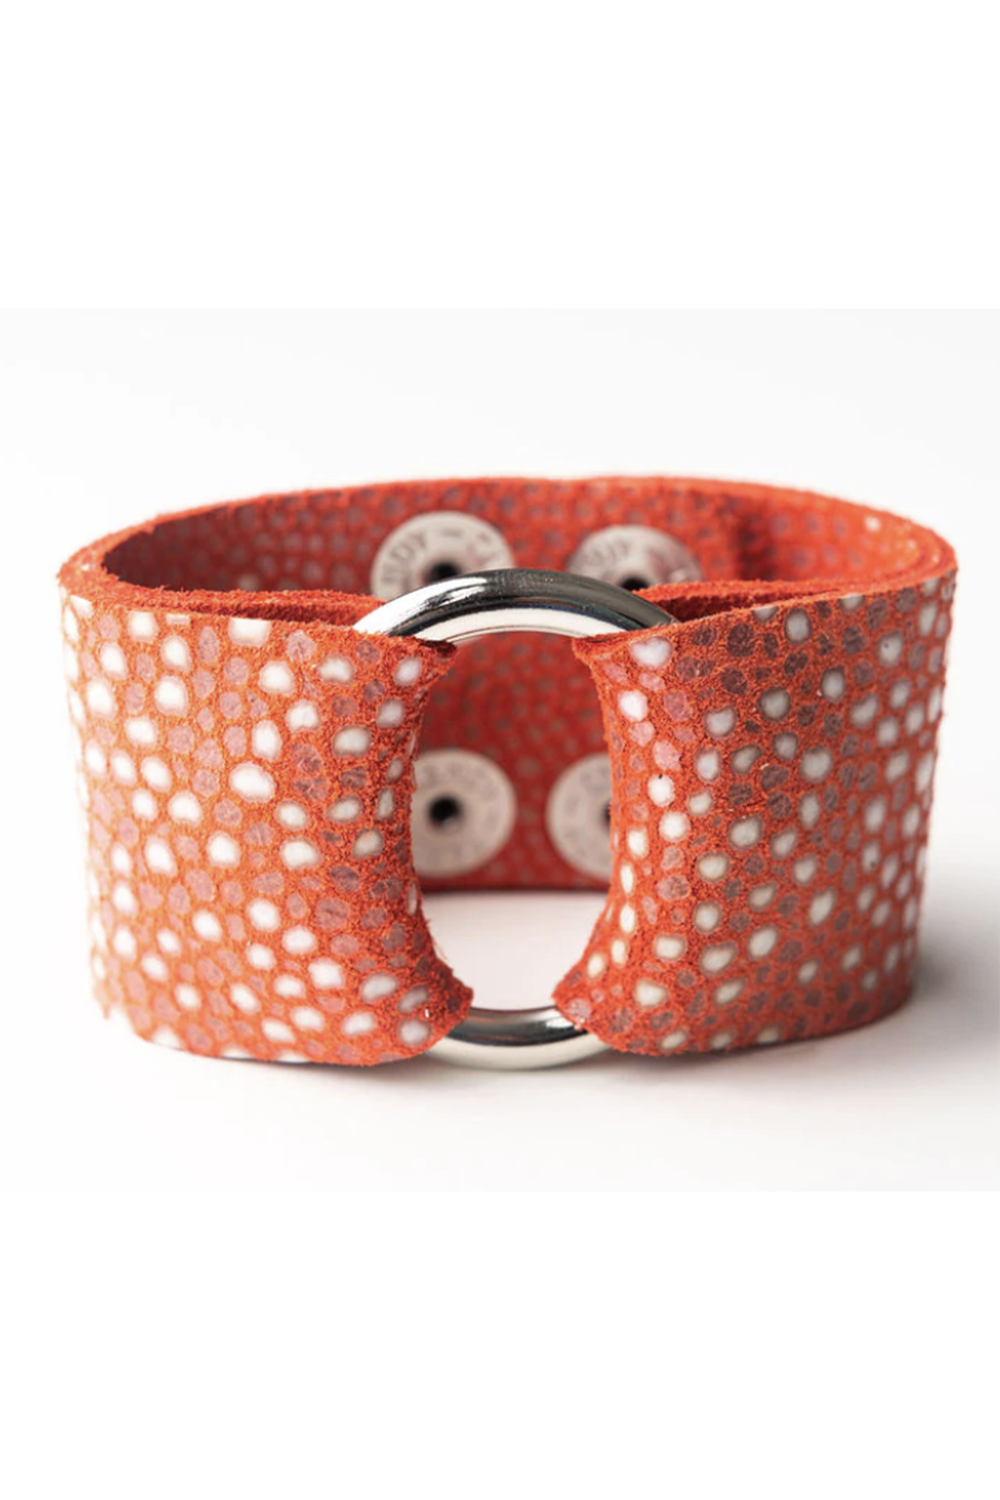 Keva Thick Cuff - Coral Speckled